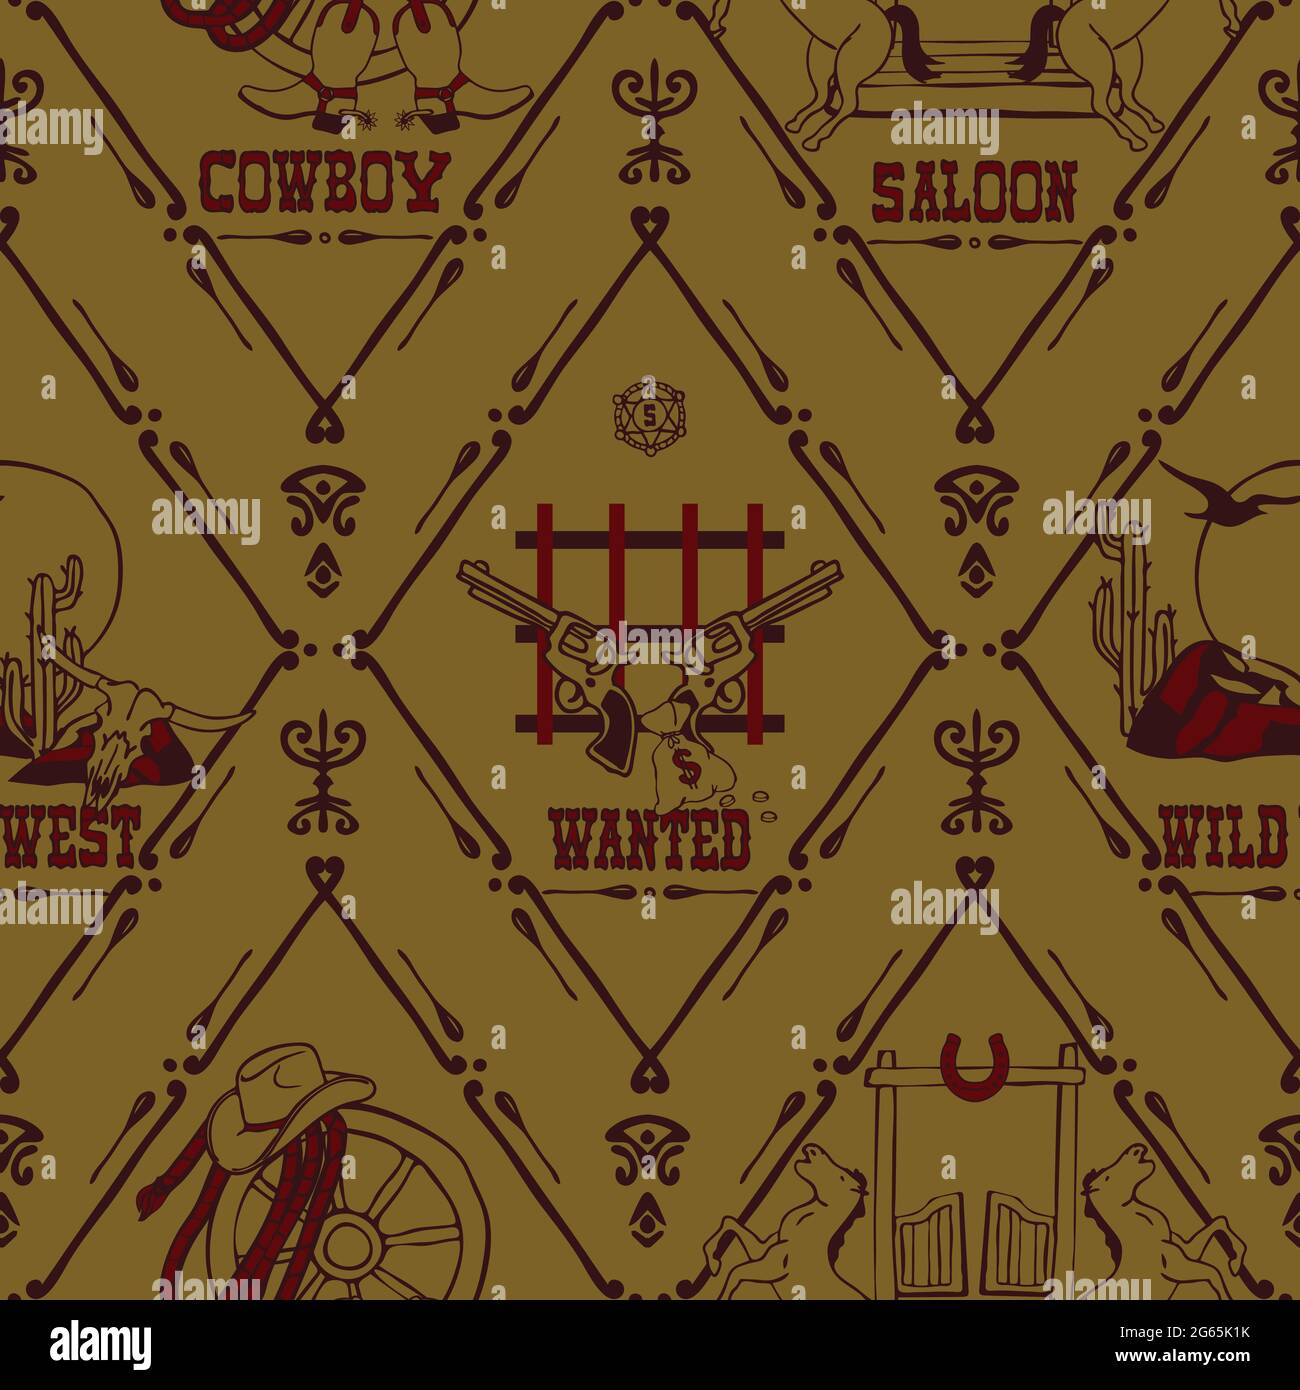 Seamless vector pattern with wild west symbols on brown background. Vintage Texas wallpaper design with western logos. Stock Vector